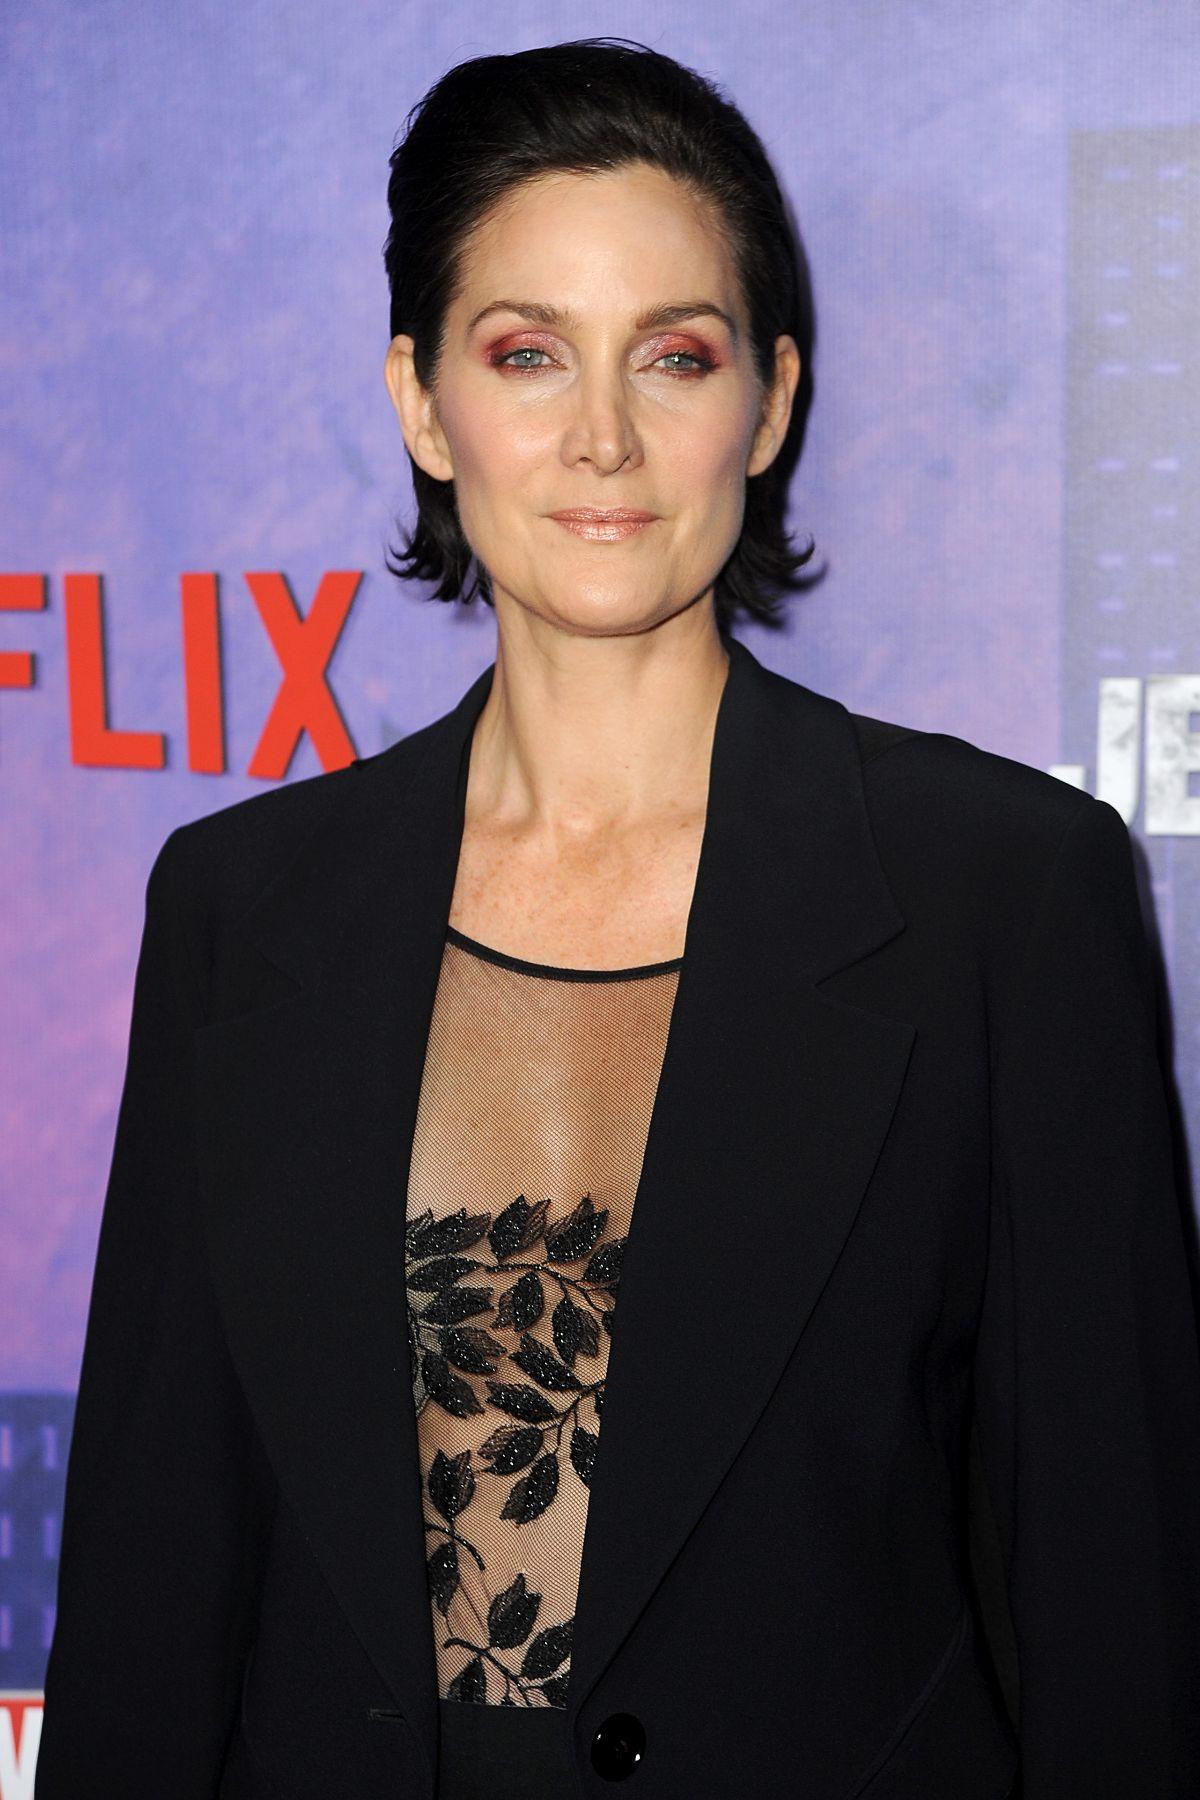 70+ Hot Pictures Of Carrie Anne Moss Will Drive You Nuts For Her 2